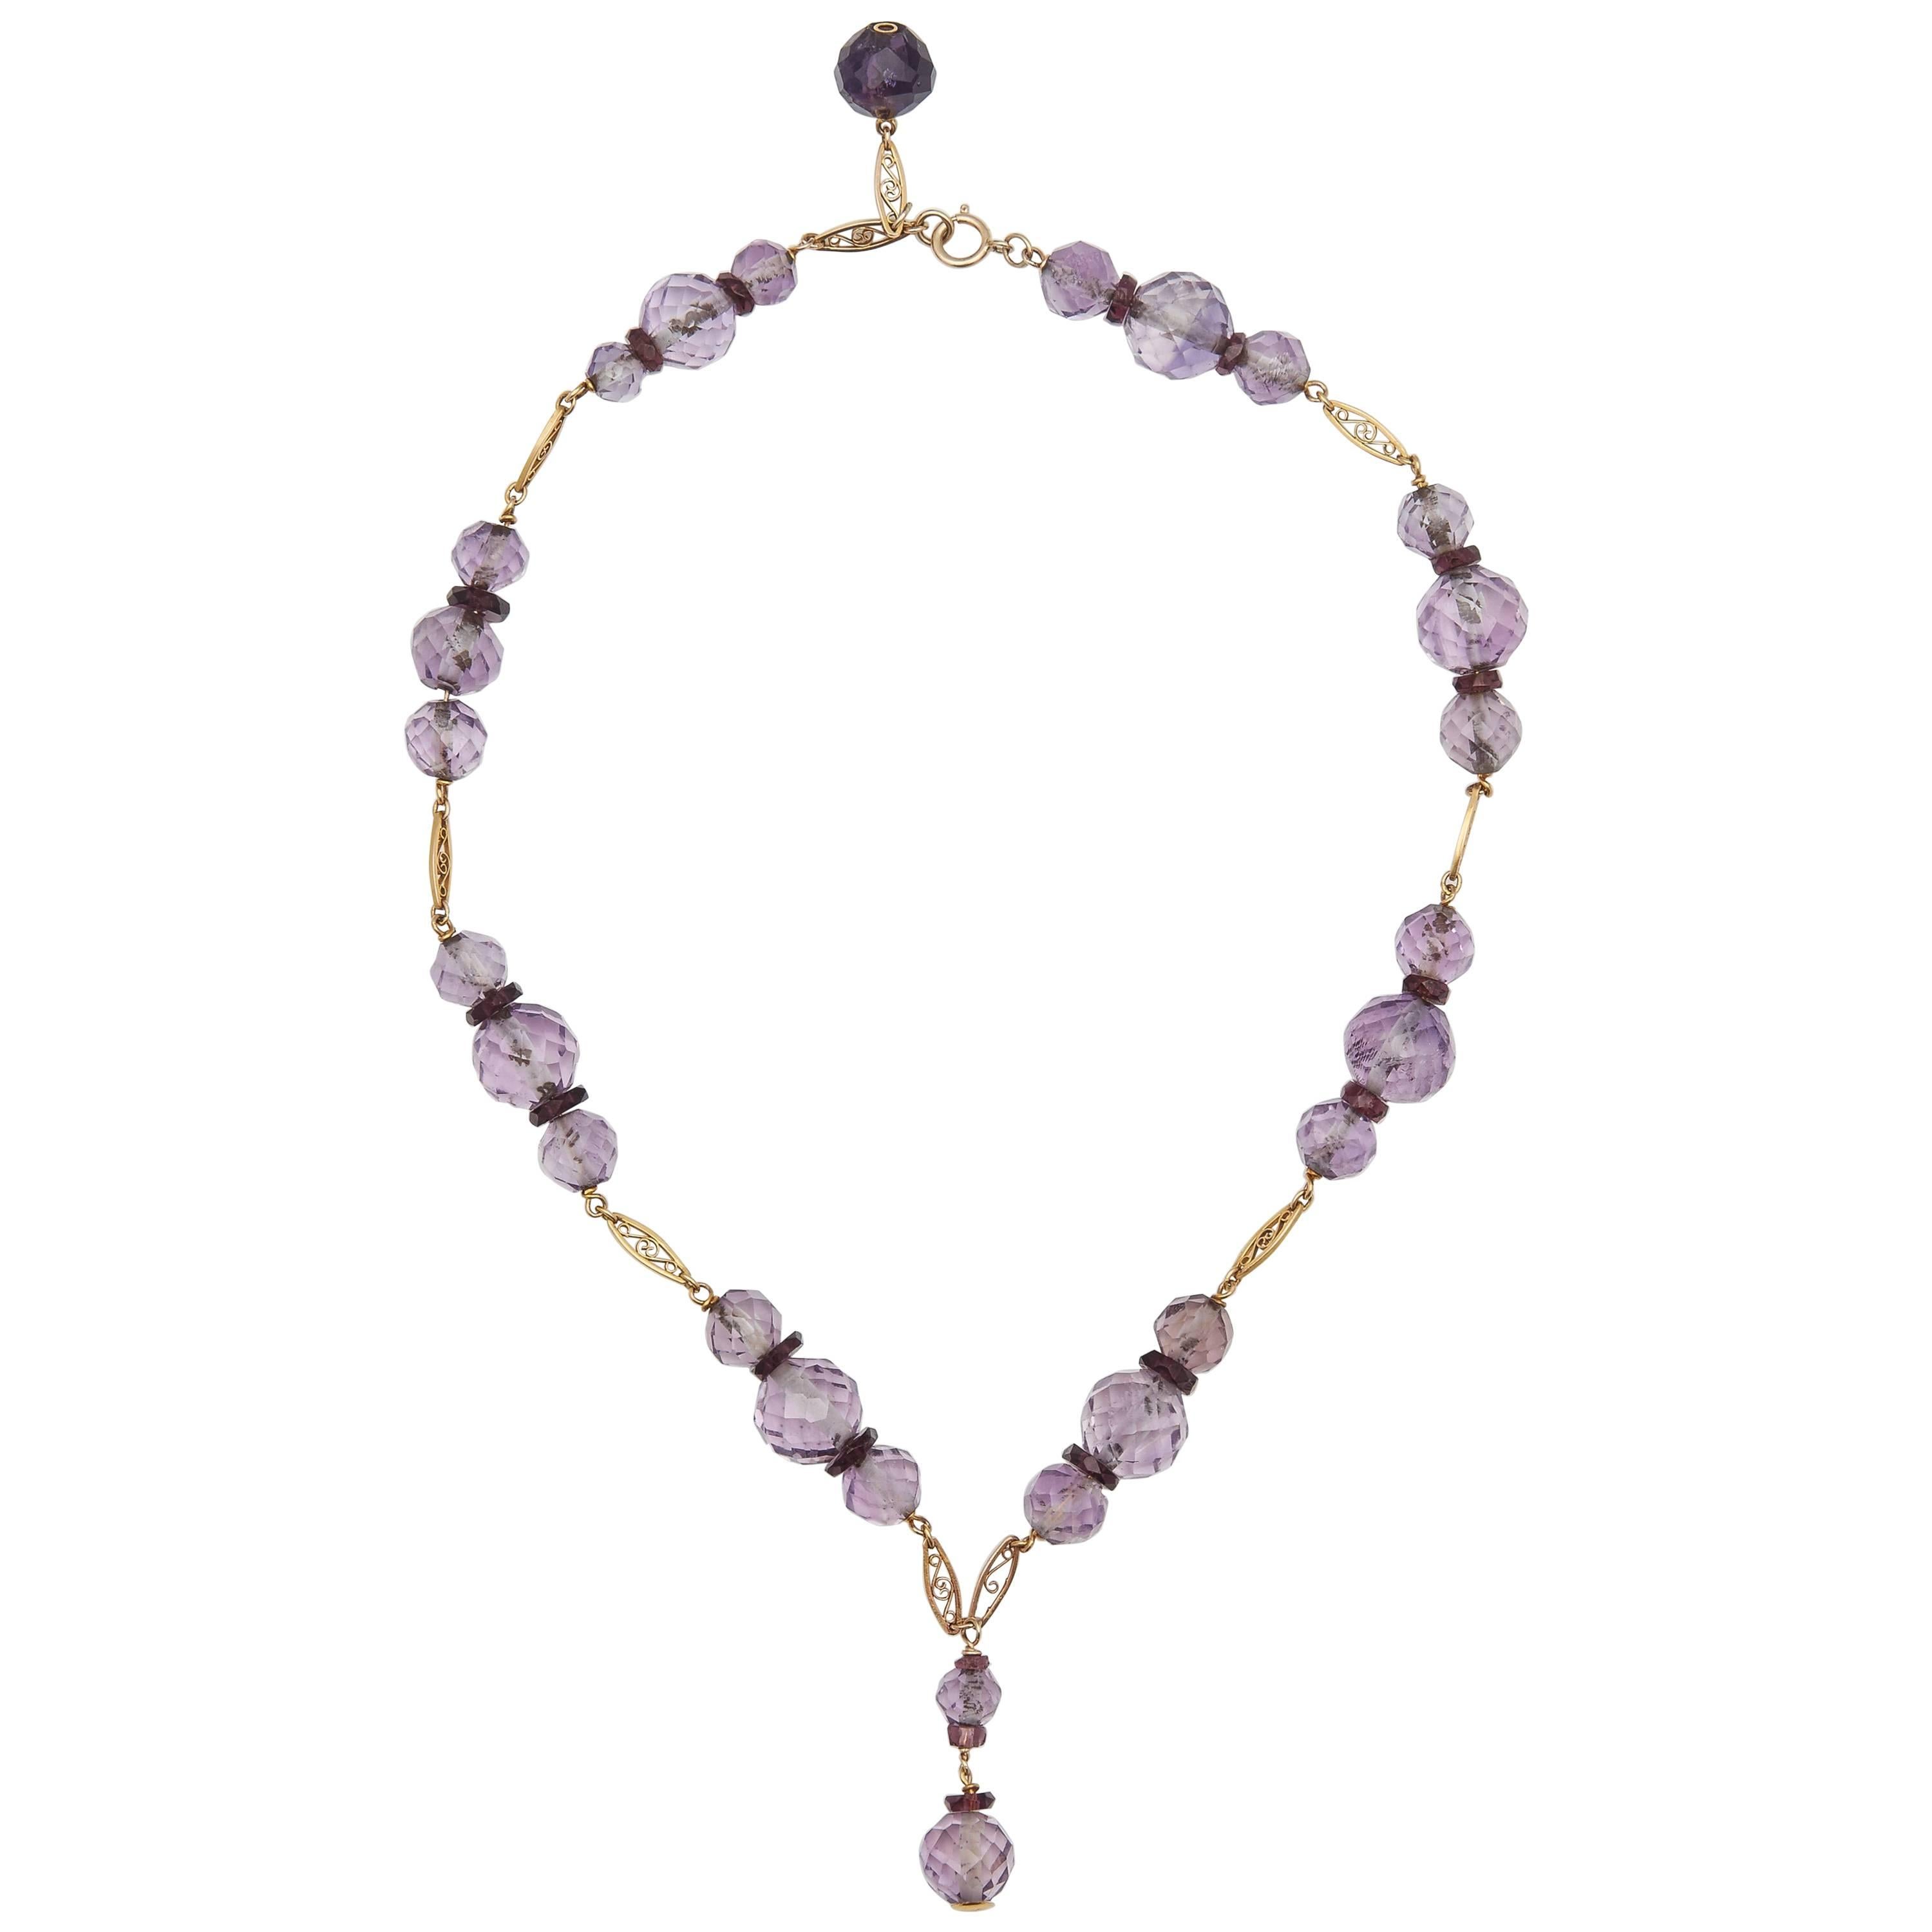 Edwardian Amethyst and Gold Necklace, circa 1920